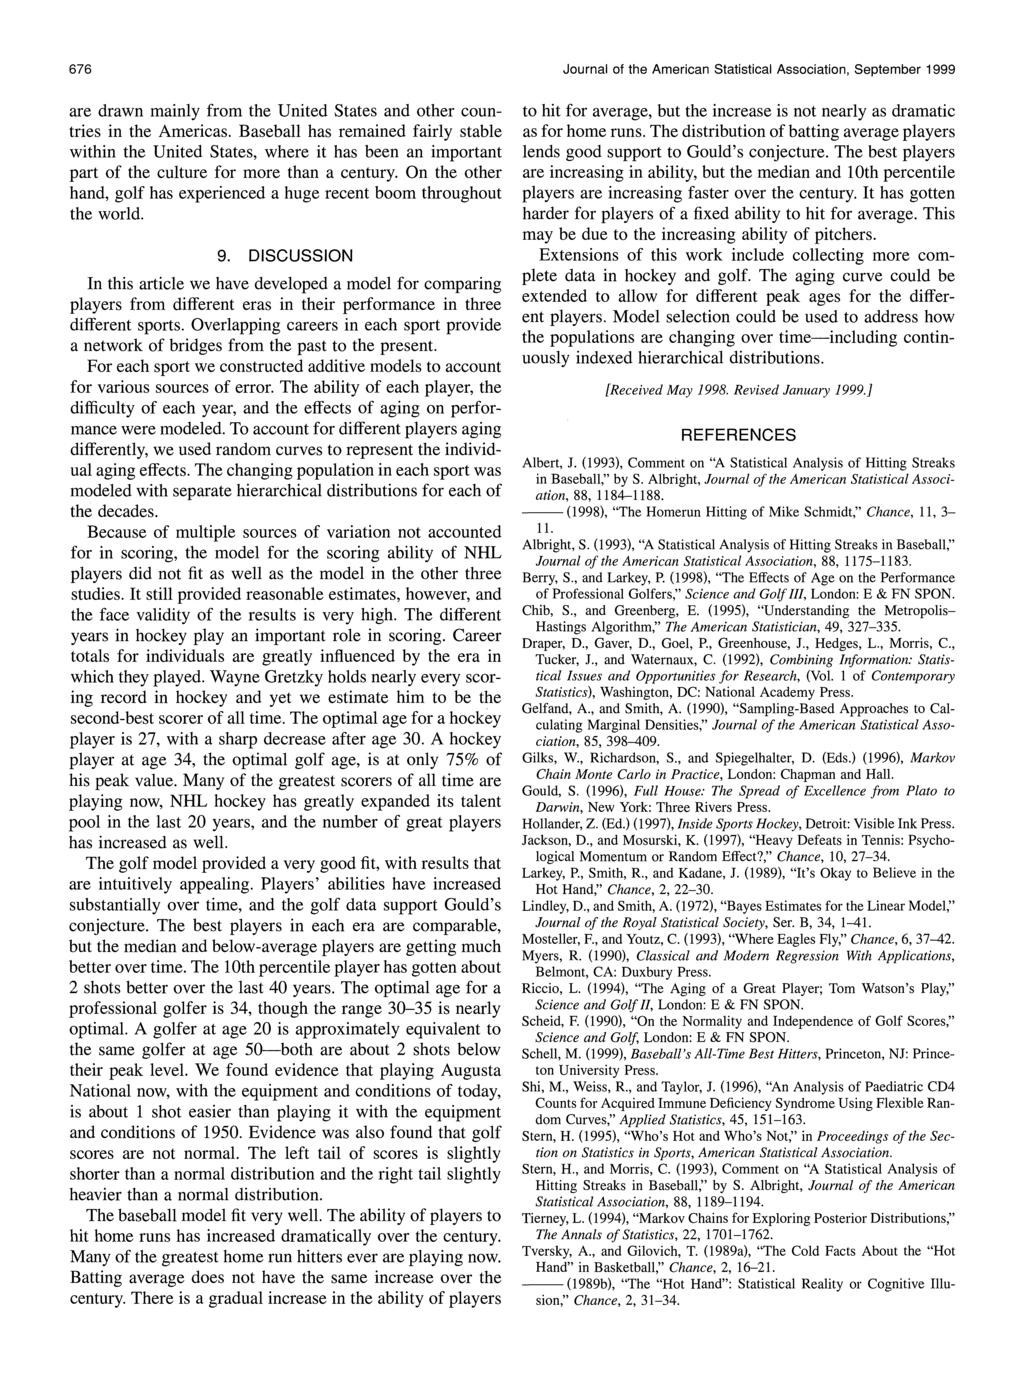 676 Journal of the American Statistical Association, September 1999 are drawn mainly from the United States and other countries in the Americas.